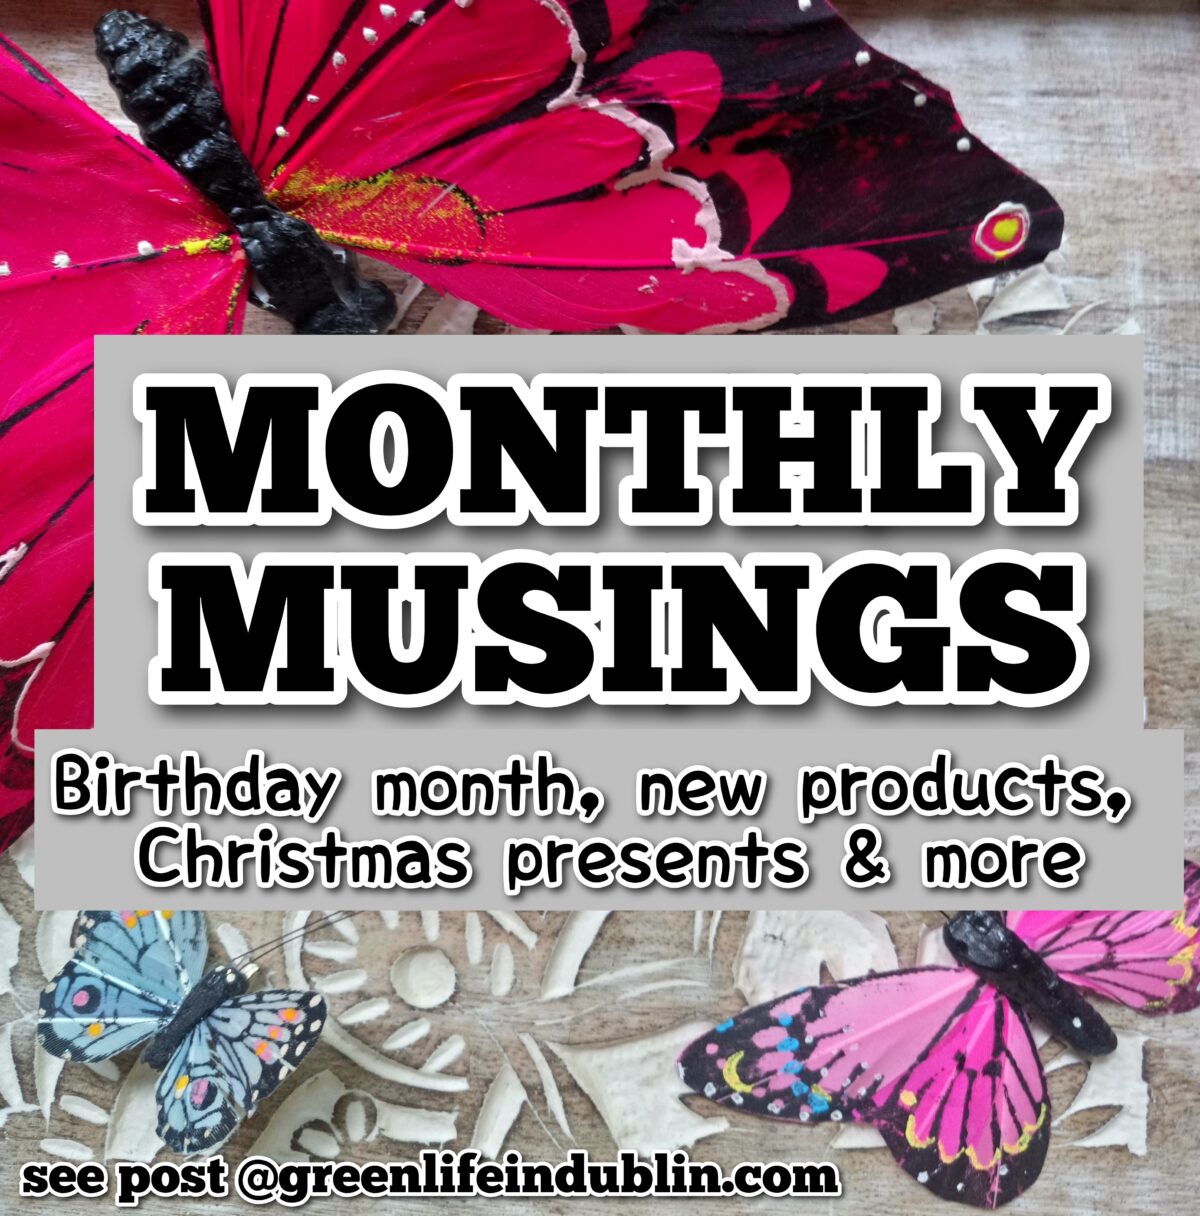 Monthly Musings – Birthday month, new products, Christmas gifts & more